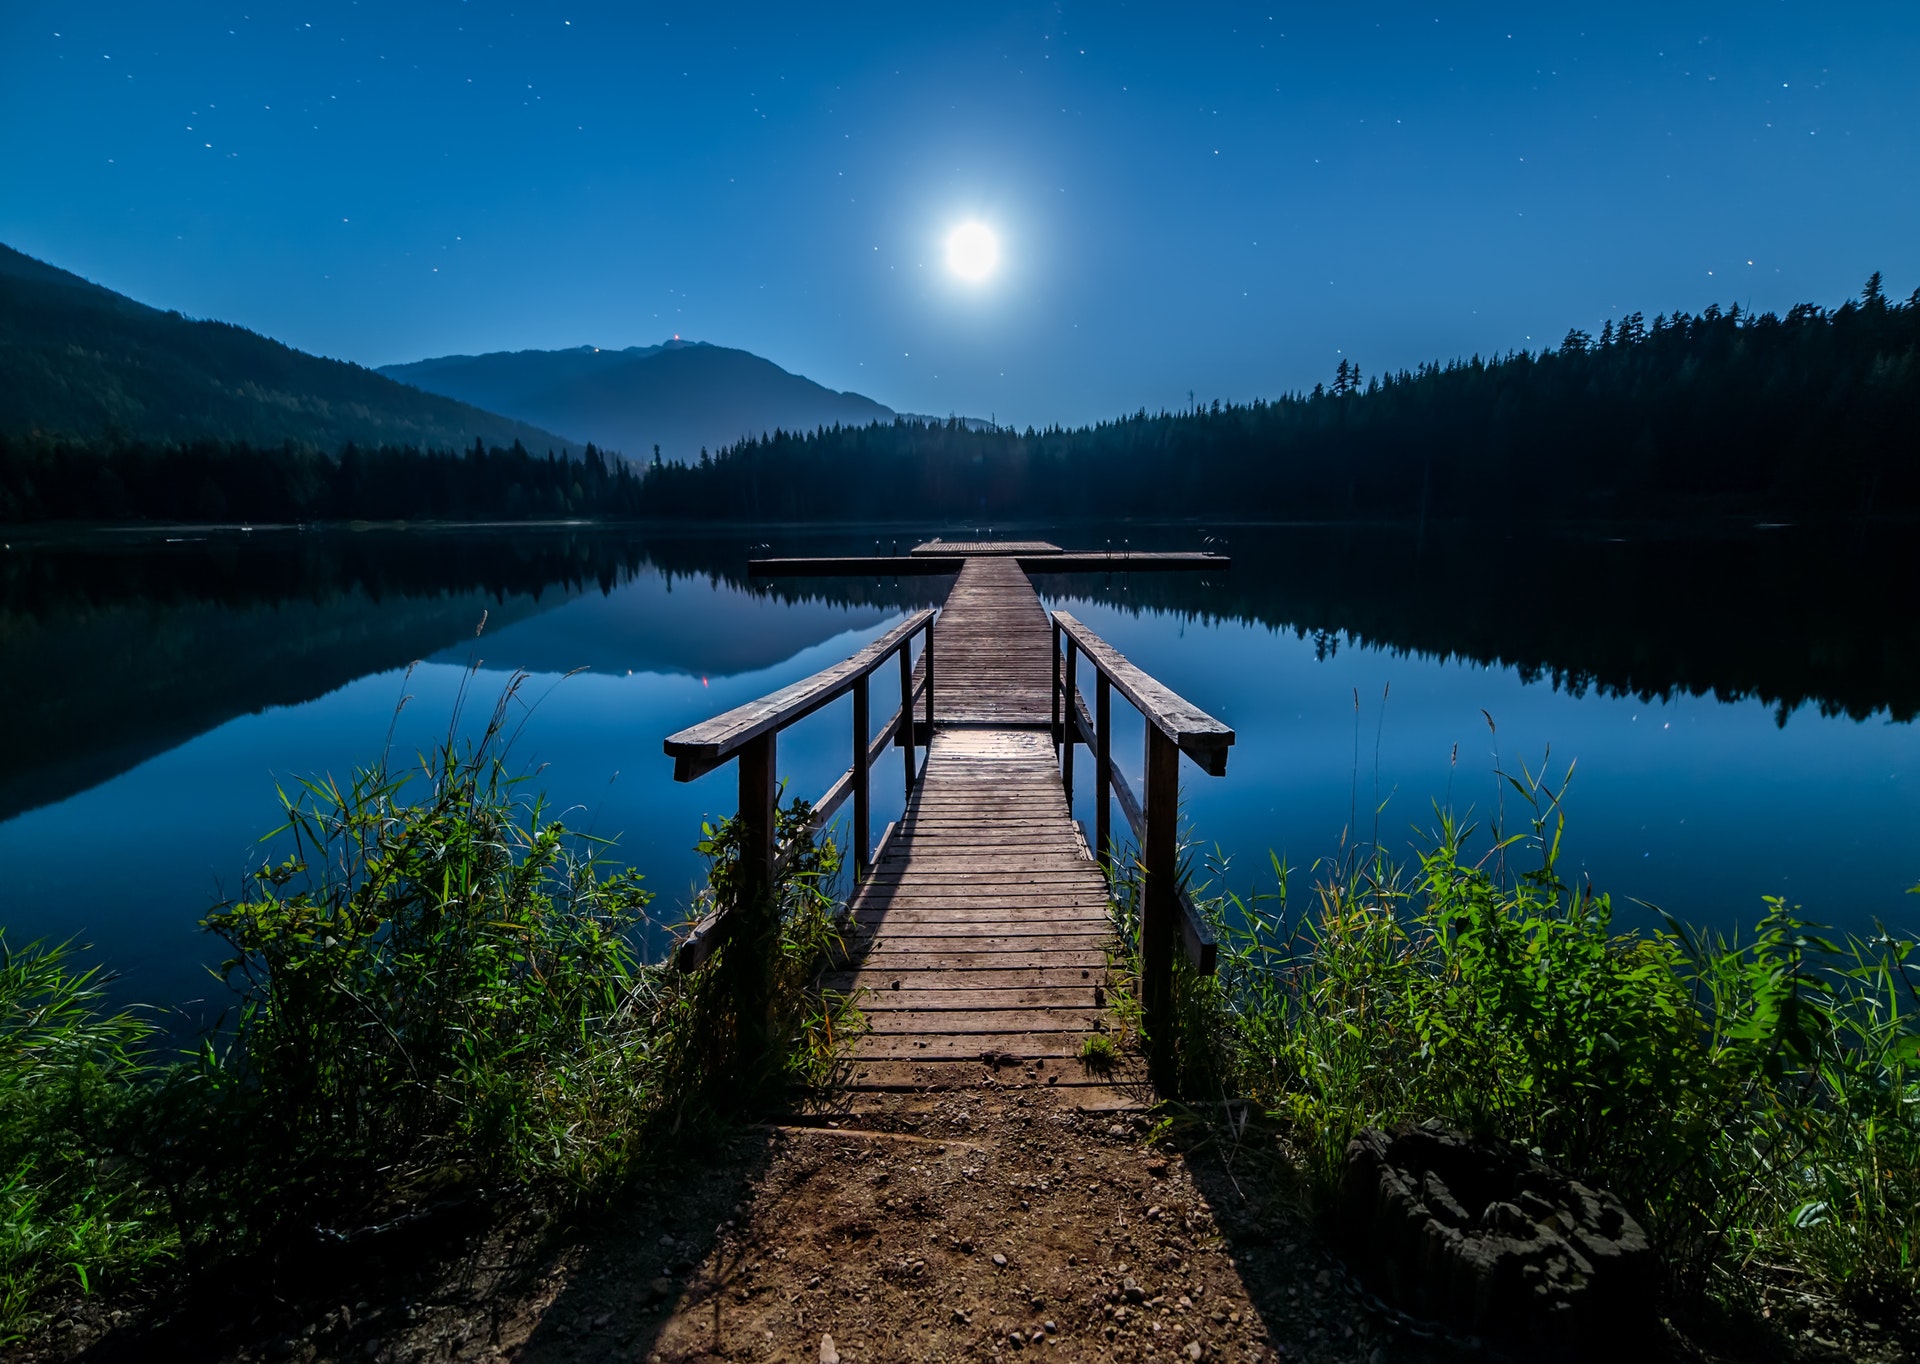 Wooden dock stretching out over moonlit lake